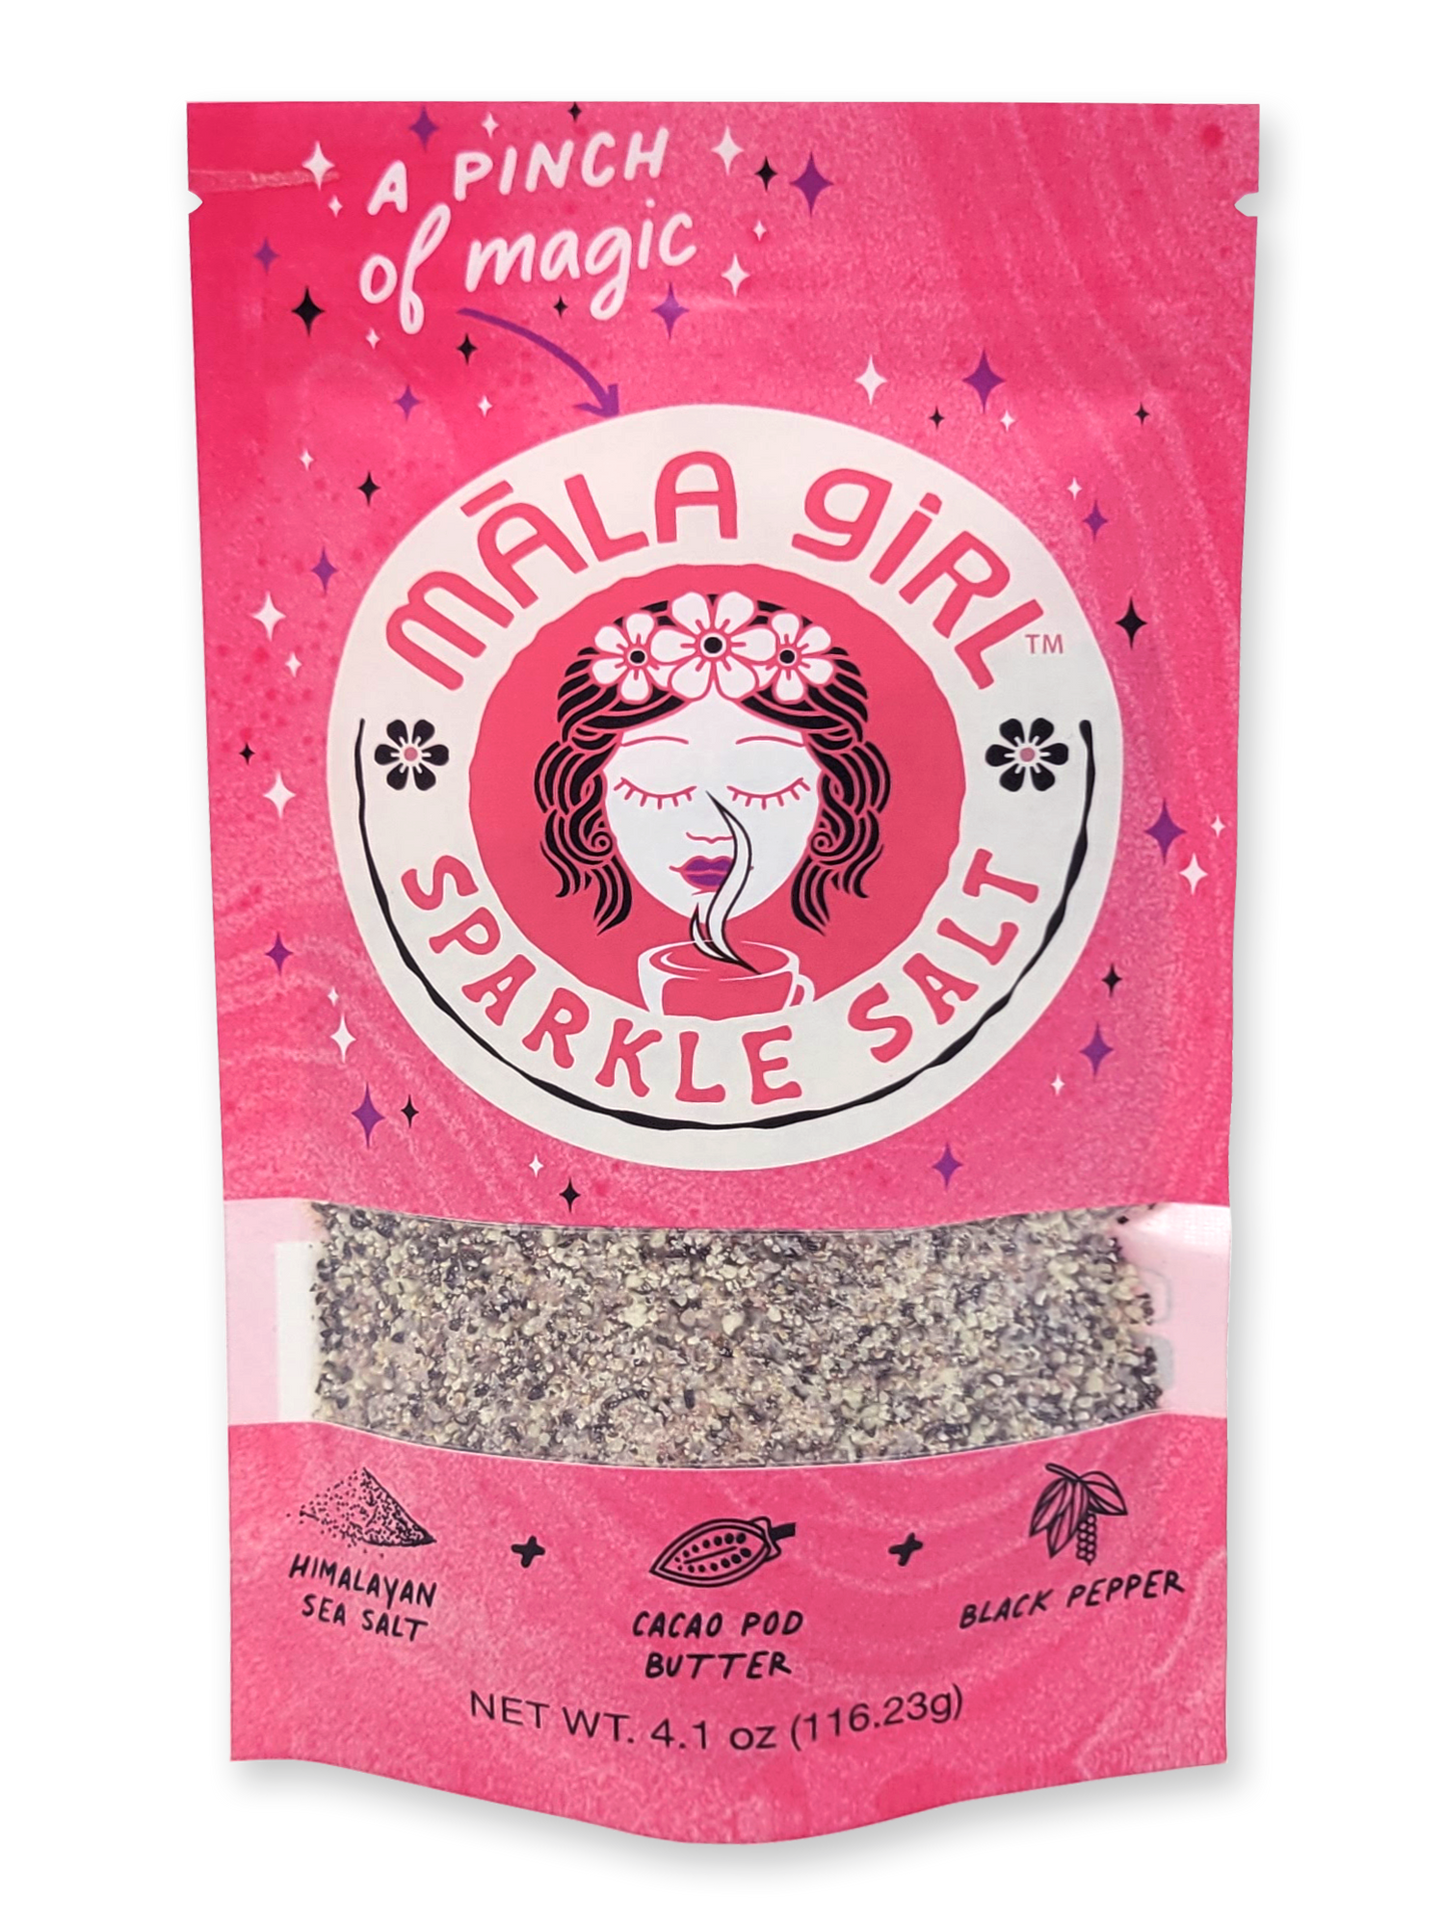 Add a little sprinkle and let your food sparkle!  Introducing Sparkle Salt. The newest product from Māla Girl, and perhaps, one of our most versatile. It’s the perfect balance of Himalayan sea salt, black pepper and cacao butter. Uniquely delicious. Great for your favorite veggie dishes, for adding depth to poultry and meats, or for topping off your baked sweets for a little dash of salt and savory. Try our Sparkle Salt today. May your cooking sparkle and your soul shine!